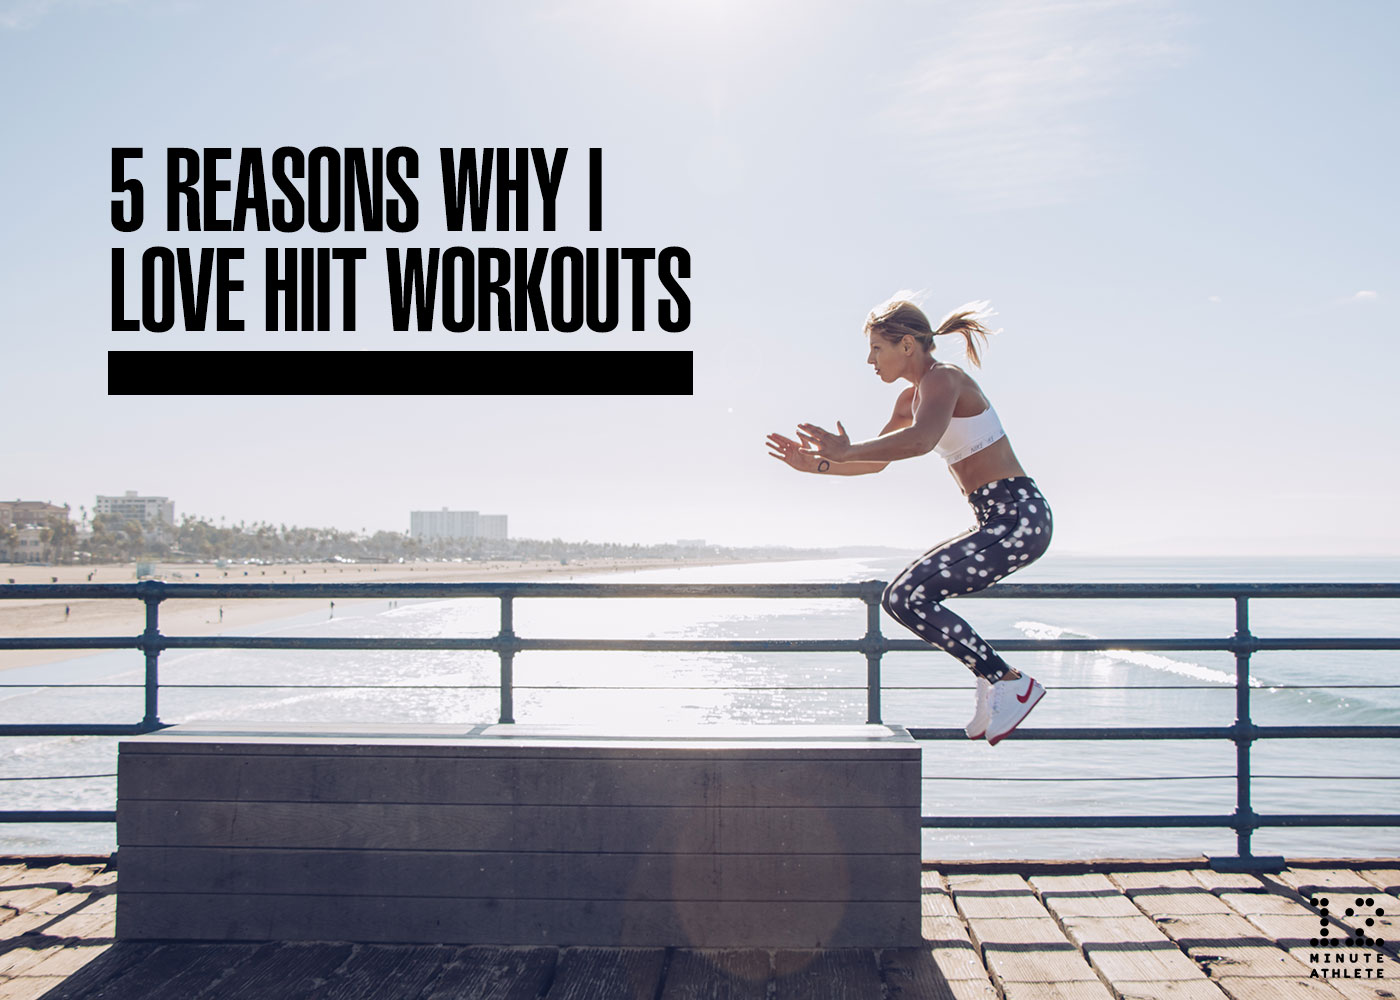 5 reasons to love HIIT workouts